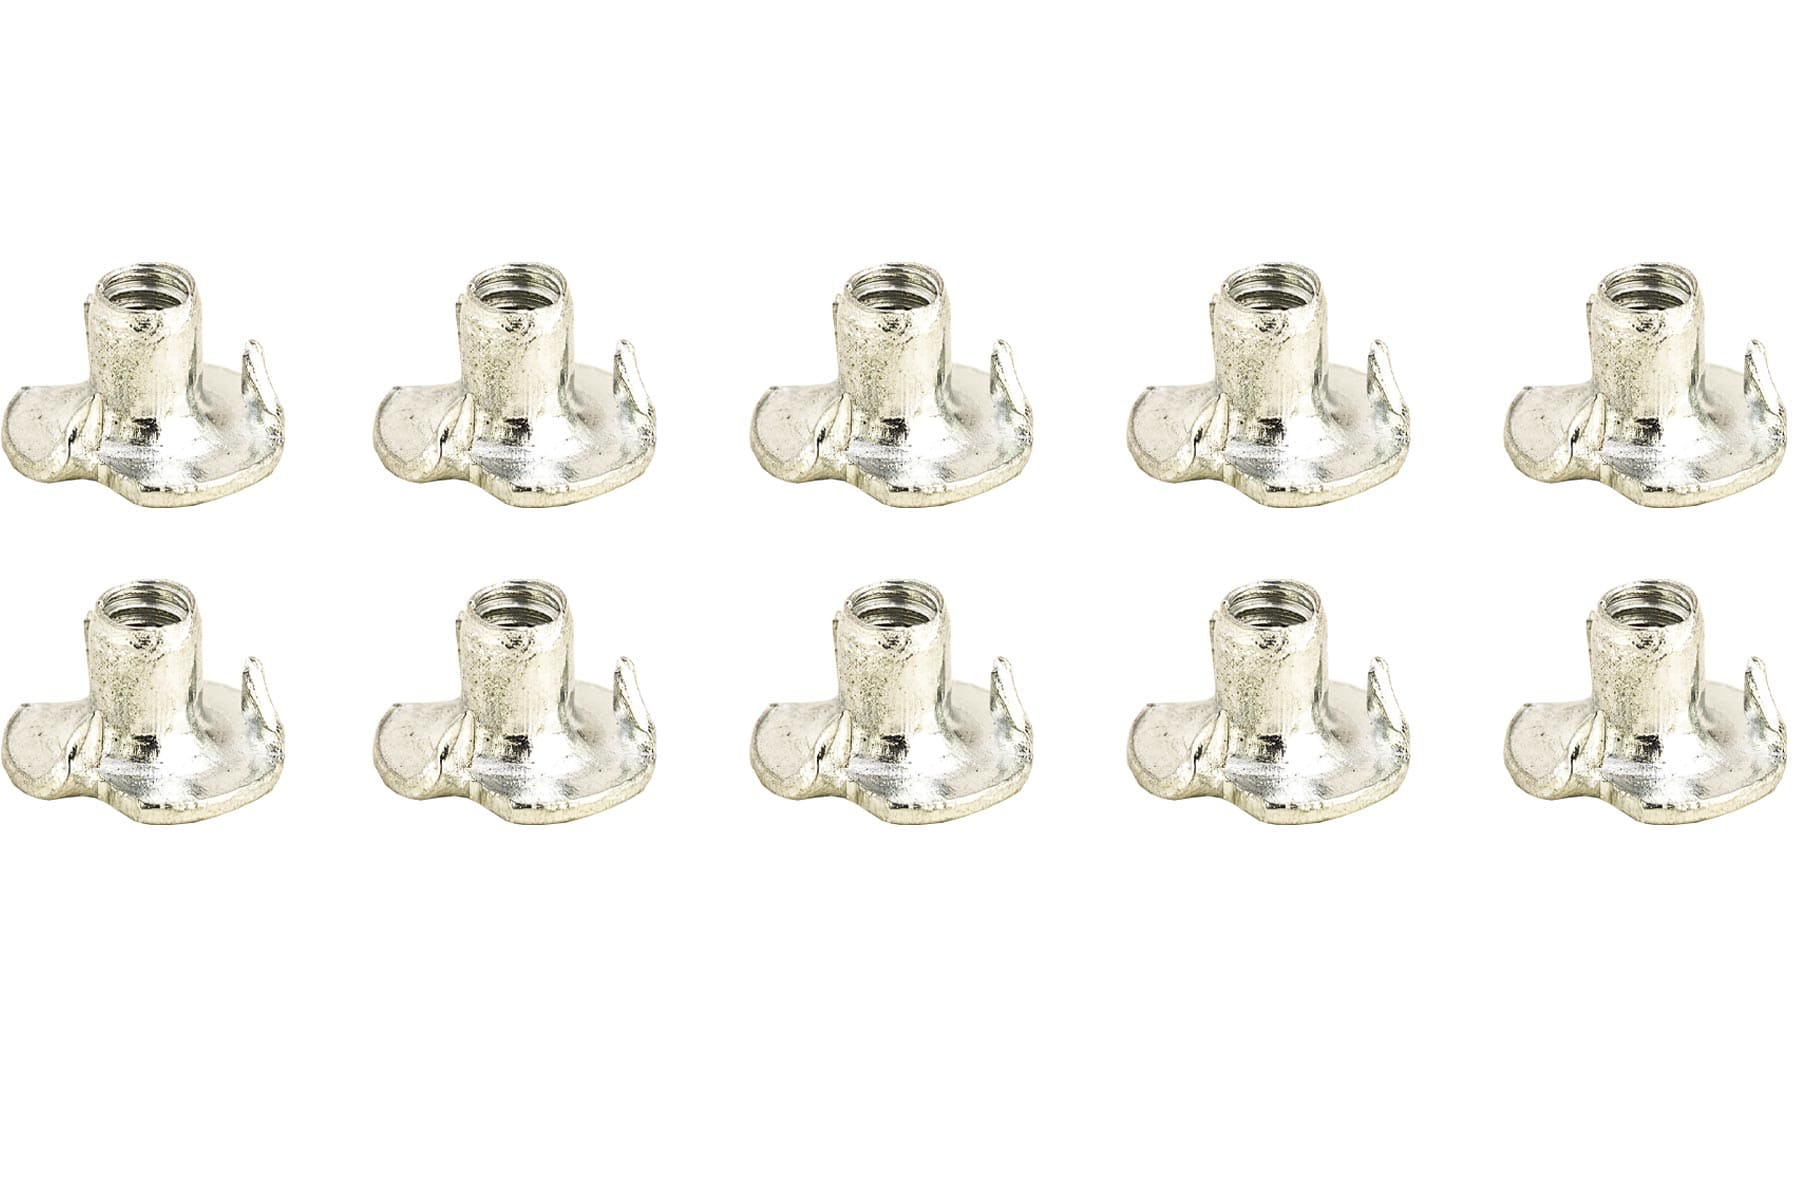 BenchCraft M2 T-Nuts (10 Pack) BCT5056-001